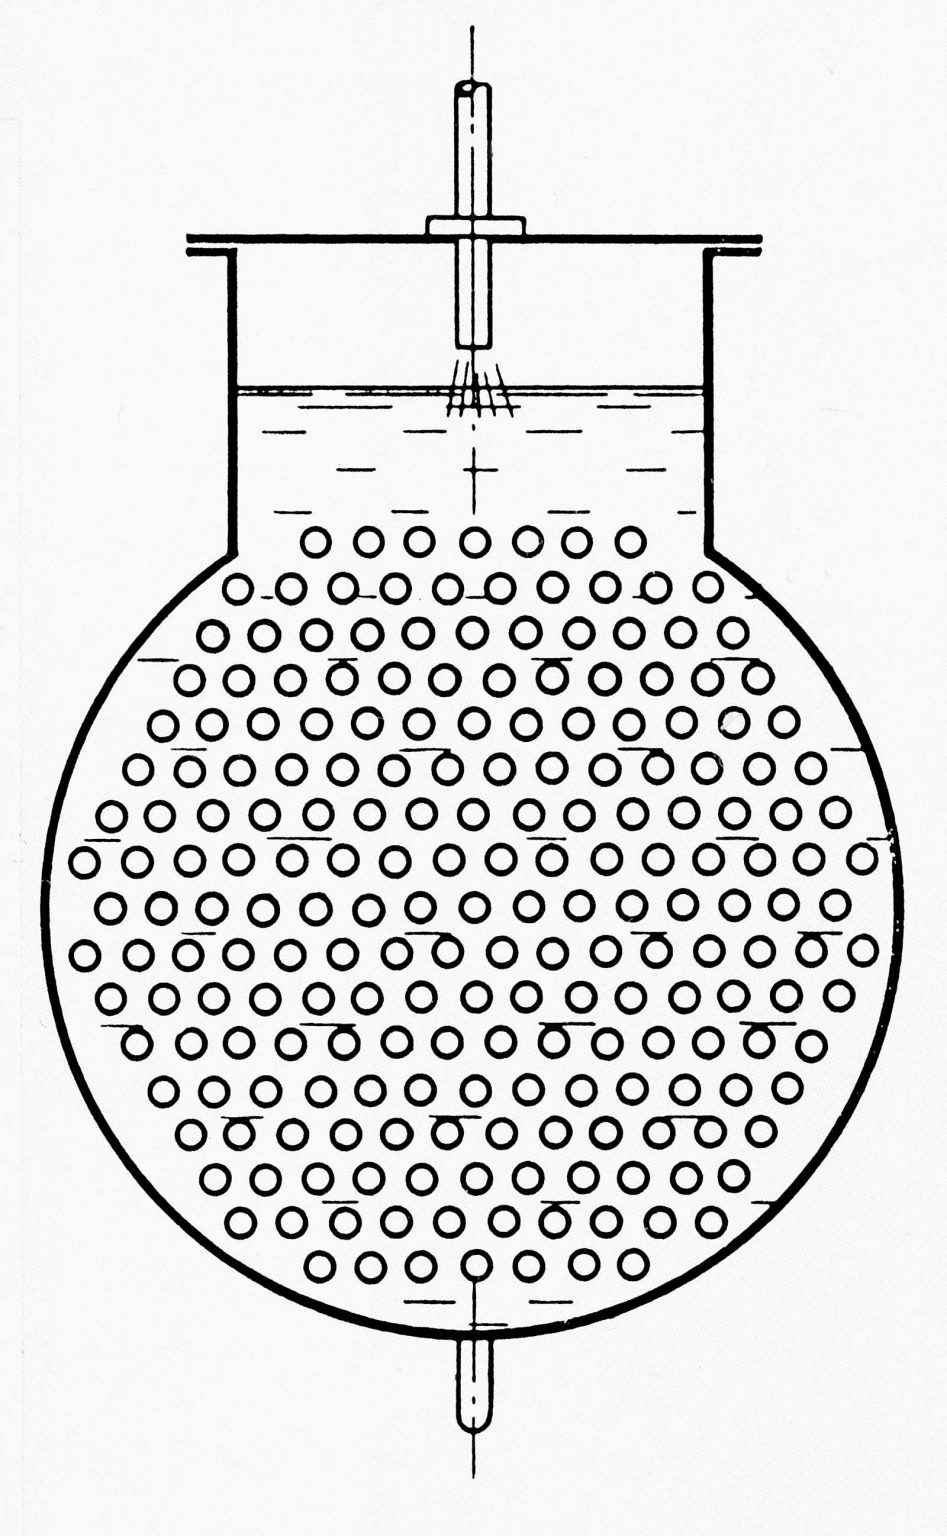 Drawing of the tube-based radiator invented by Wilhelm Maybach dating back to 1897